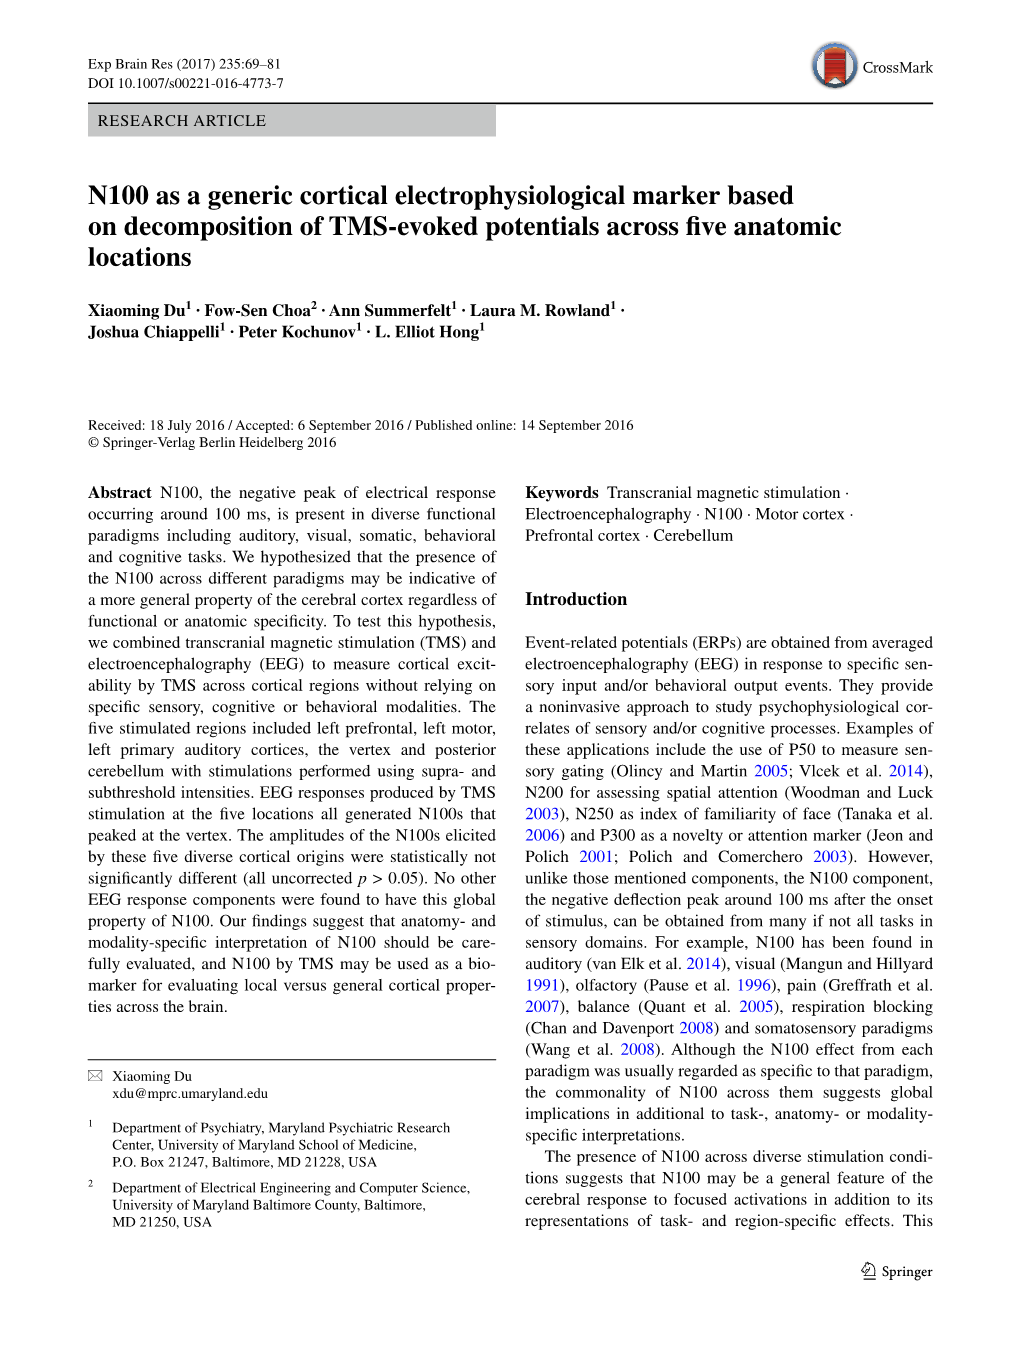 N100 As a Generic Cortical Electrophysiological Marker Based on Decomposition of TMS‑Evoked Potentials Across Five Anatomic Locations